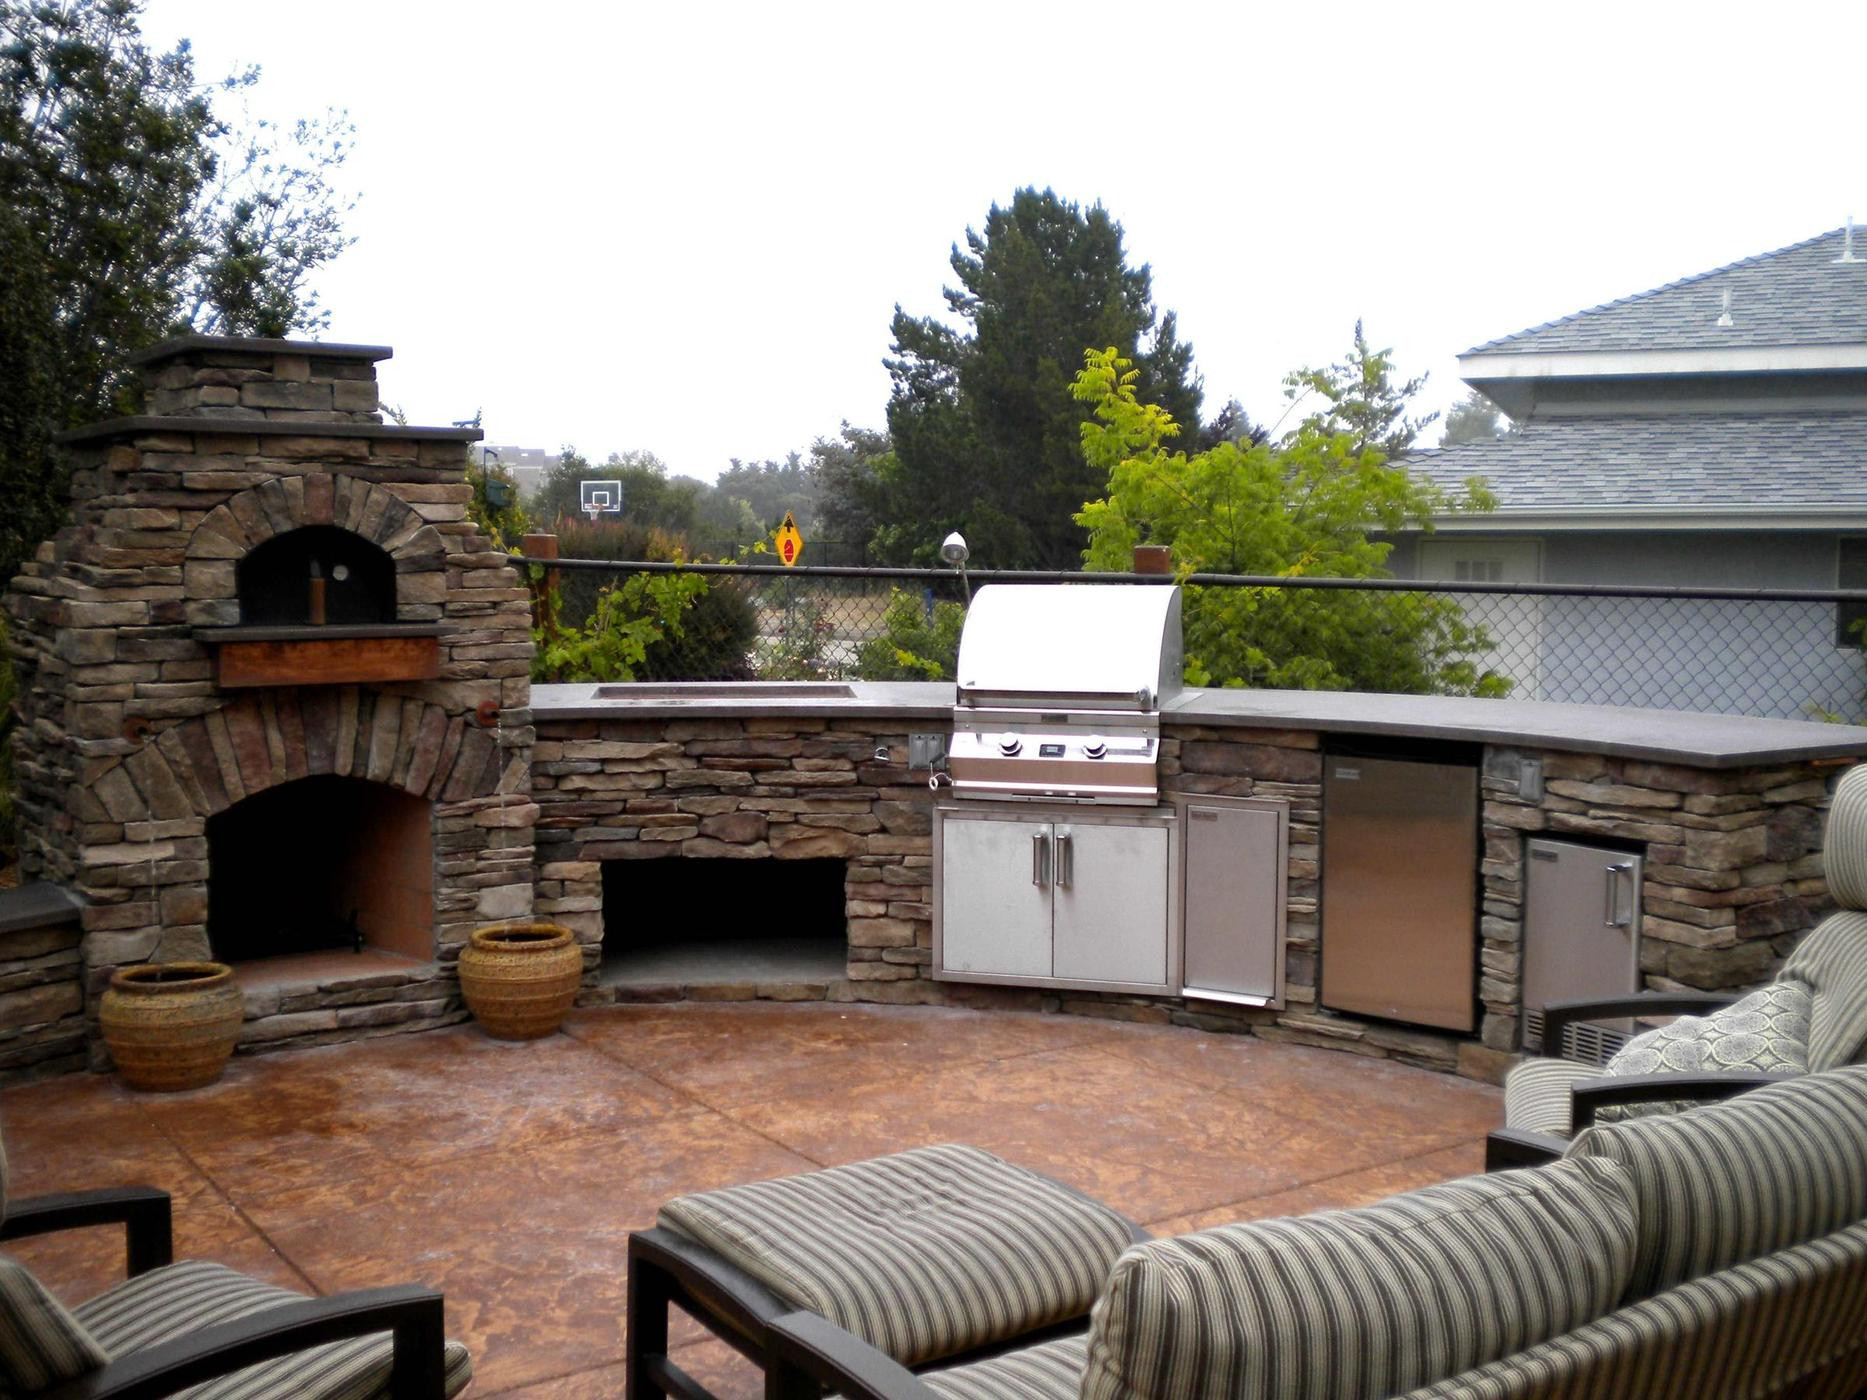 Outdoor Kitchen Pizza Oven
 Help customers pondering outdoor kitchens stand out